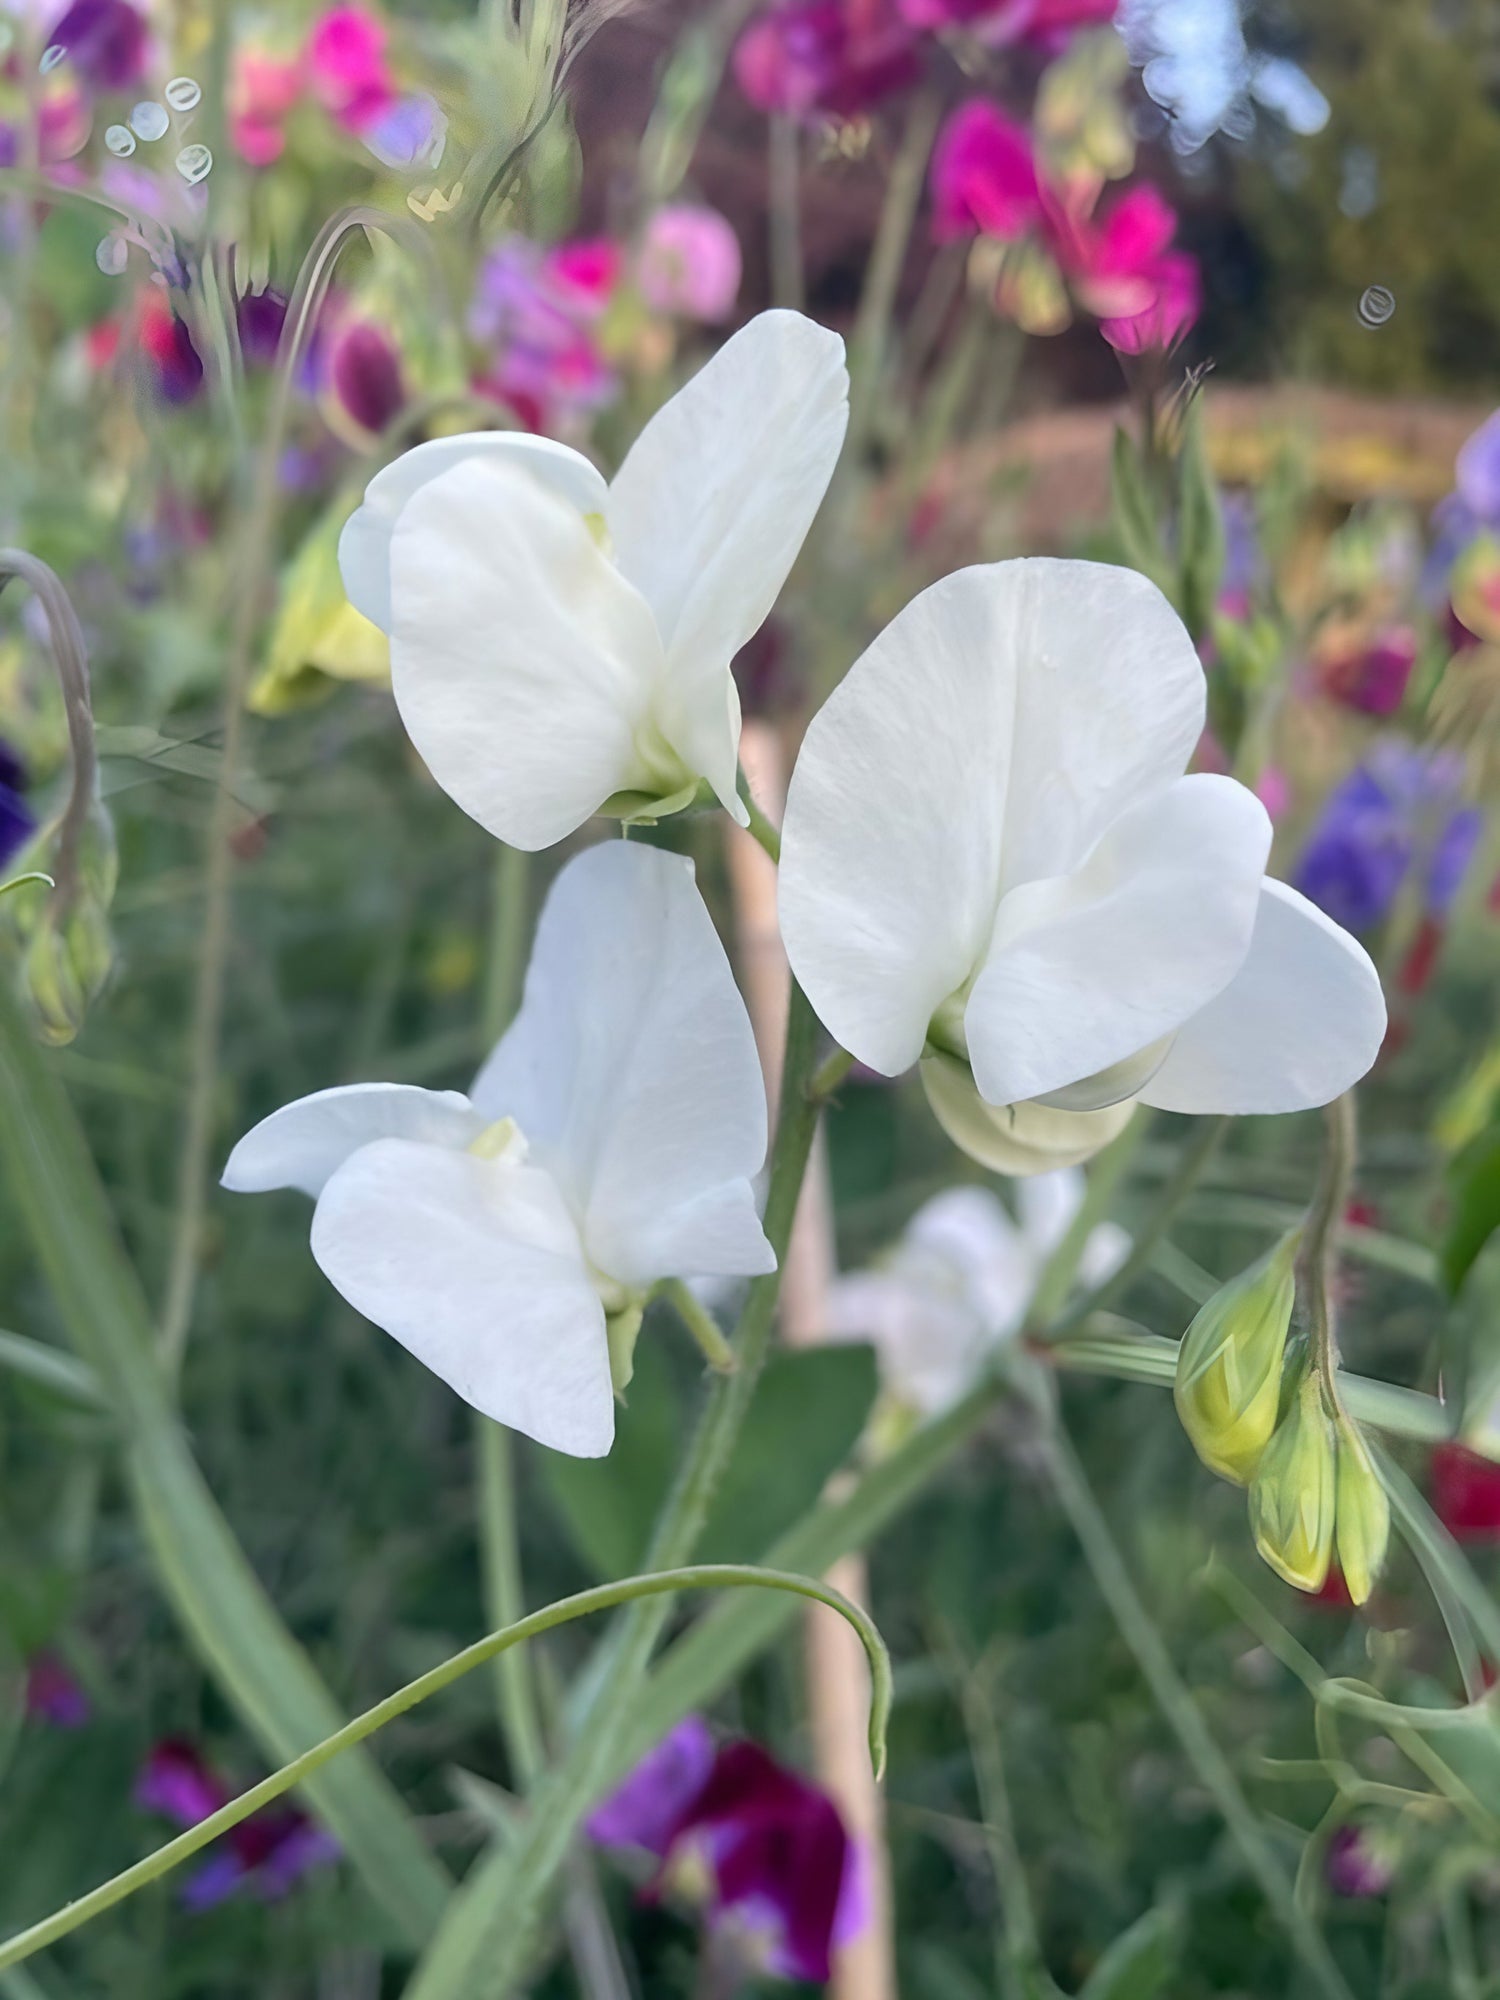 Cluster of Sweet Pea Spencer Swan Lake blooms in a garden environment